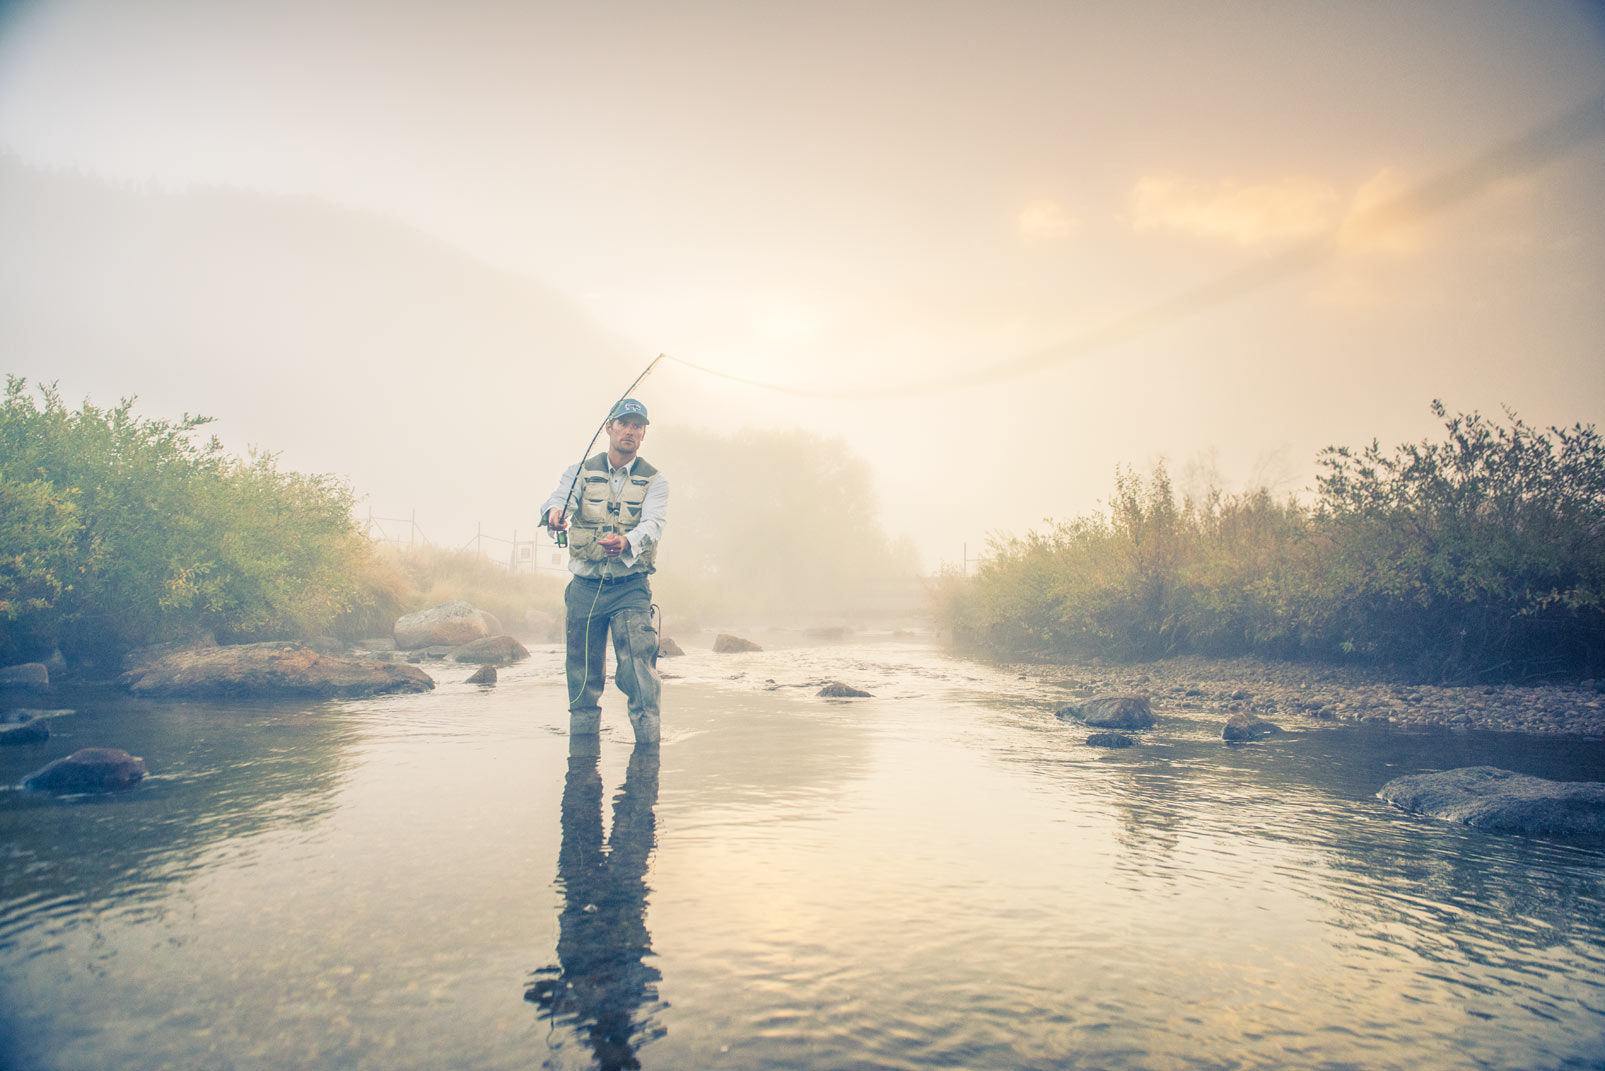 Big Thompson River is one of many fly fishing spots in Rocky Mountain, which includes the headwaters of the Colorado River. The park also straddles the Continental Divide and several peaks above 10,000 feet. Photo © Nick Hall